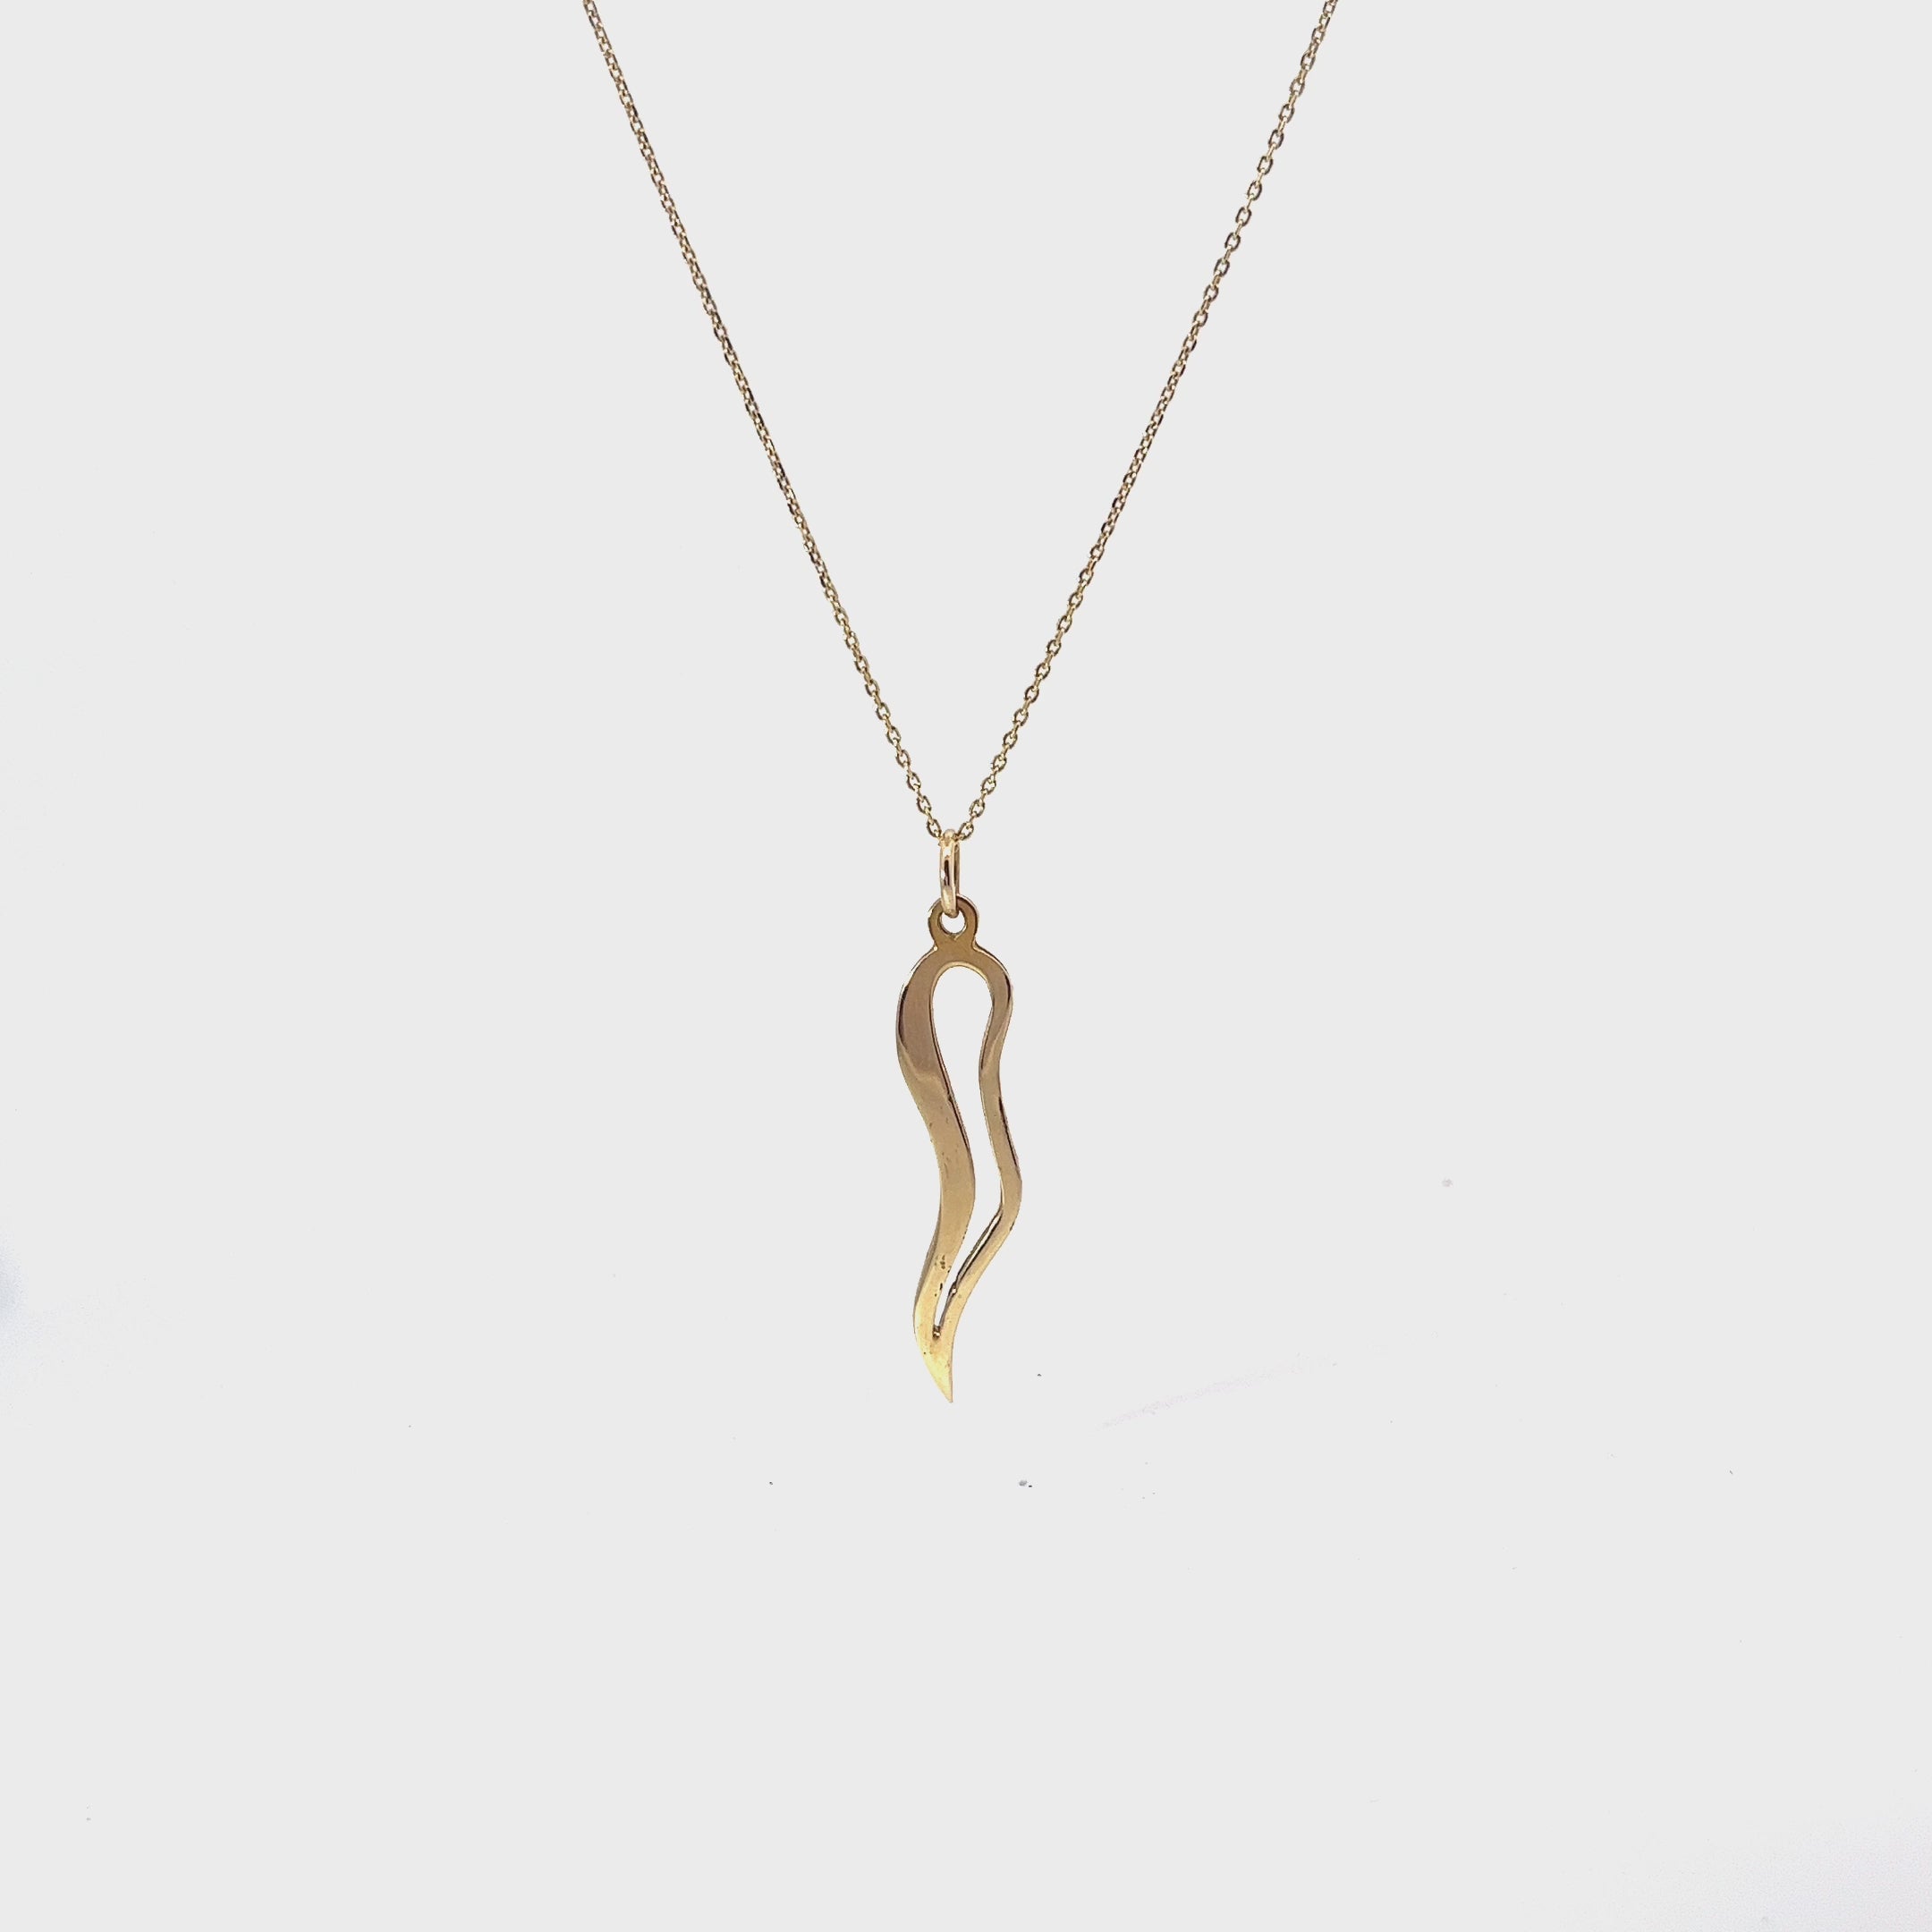 Mens 14k yellow gold Italian Horn Necklace